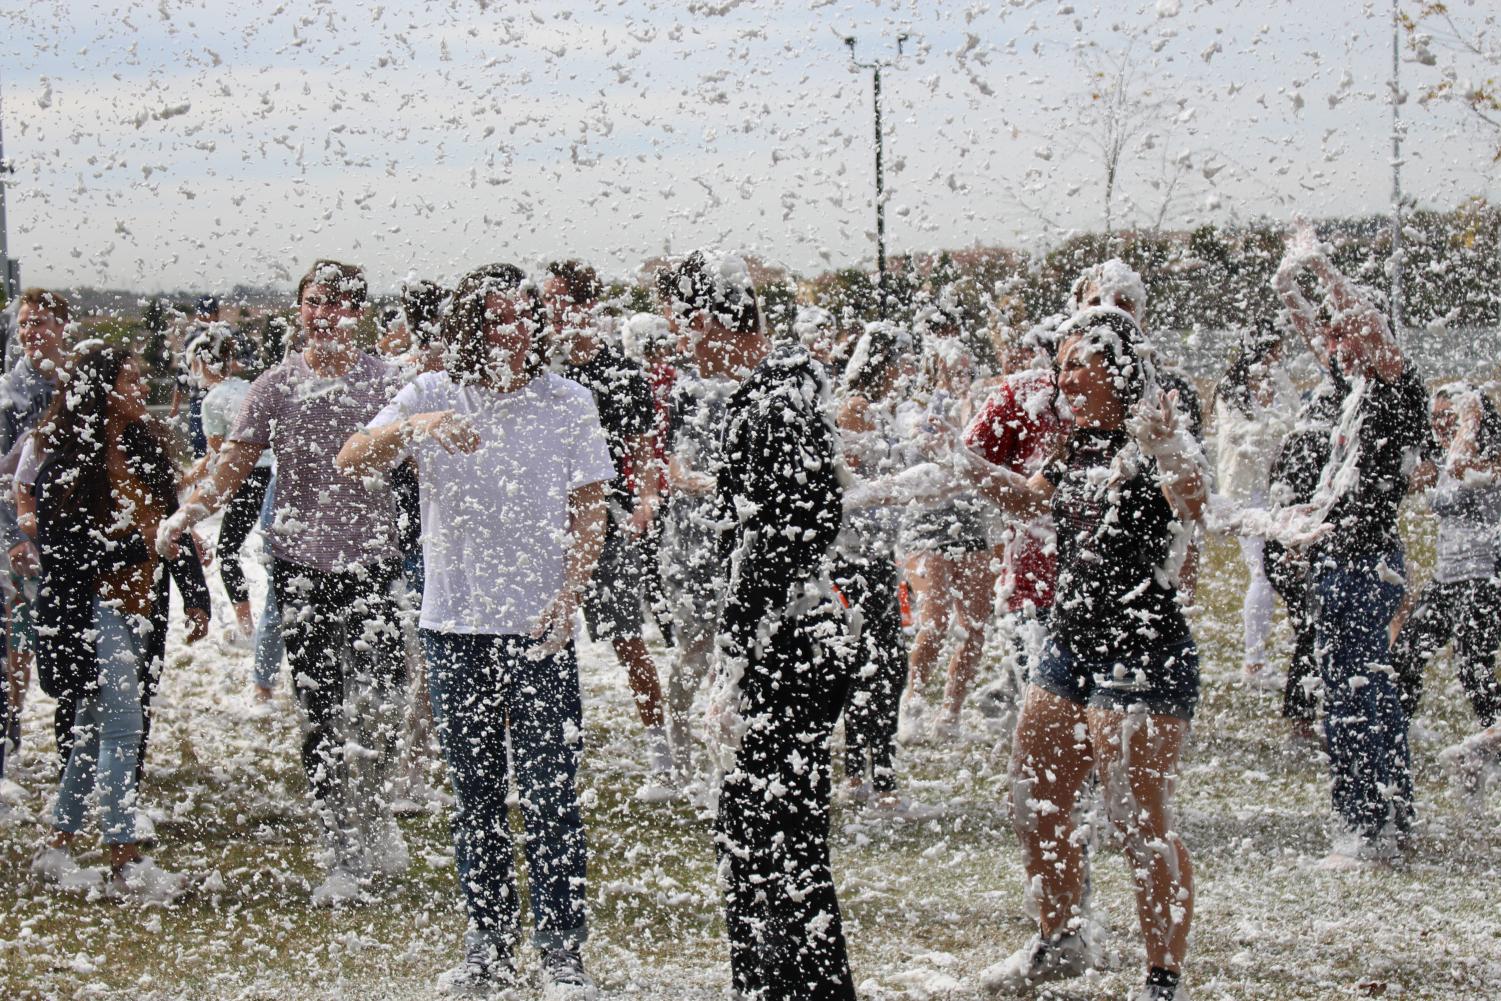 Students+Celebrate+Hoopcoming+with+a+California+Snow+Day